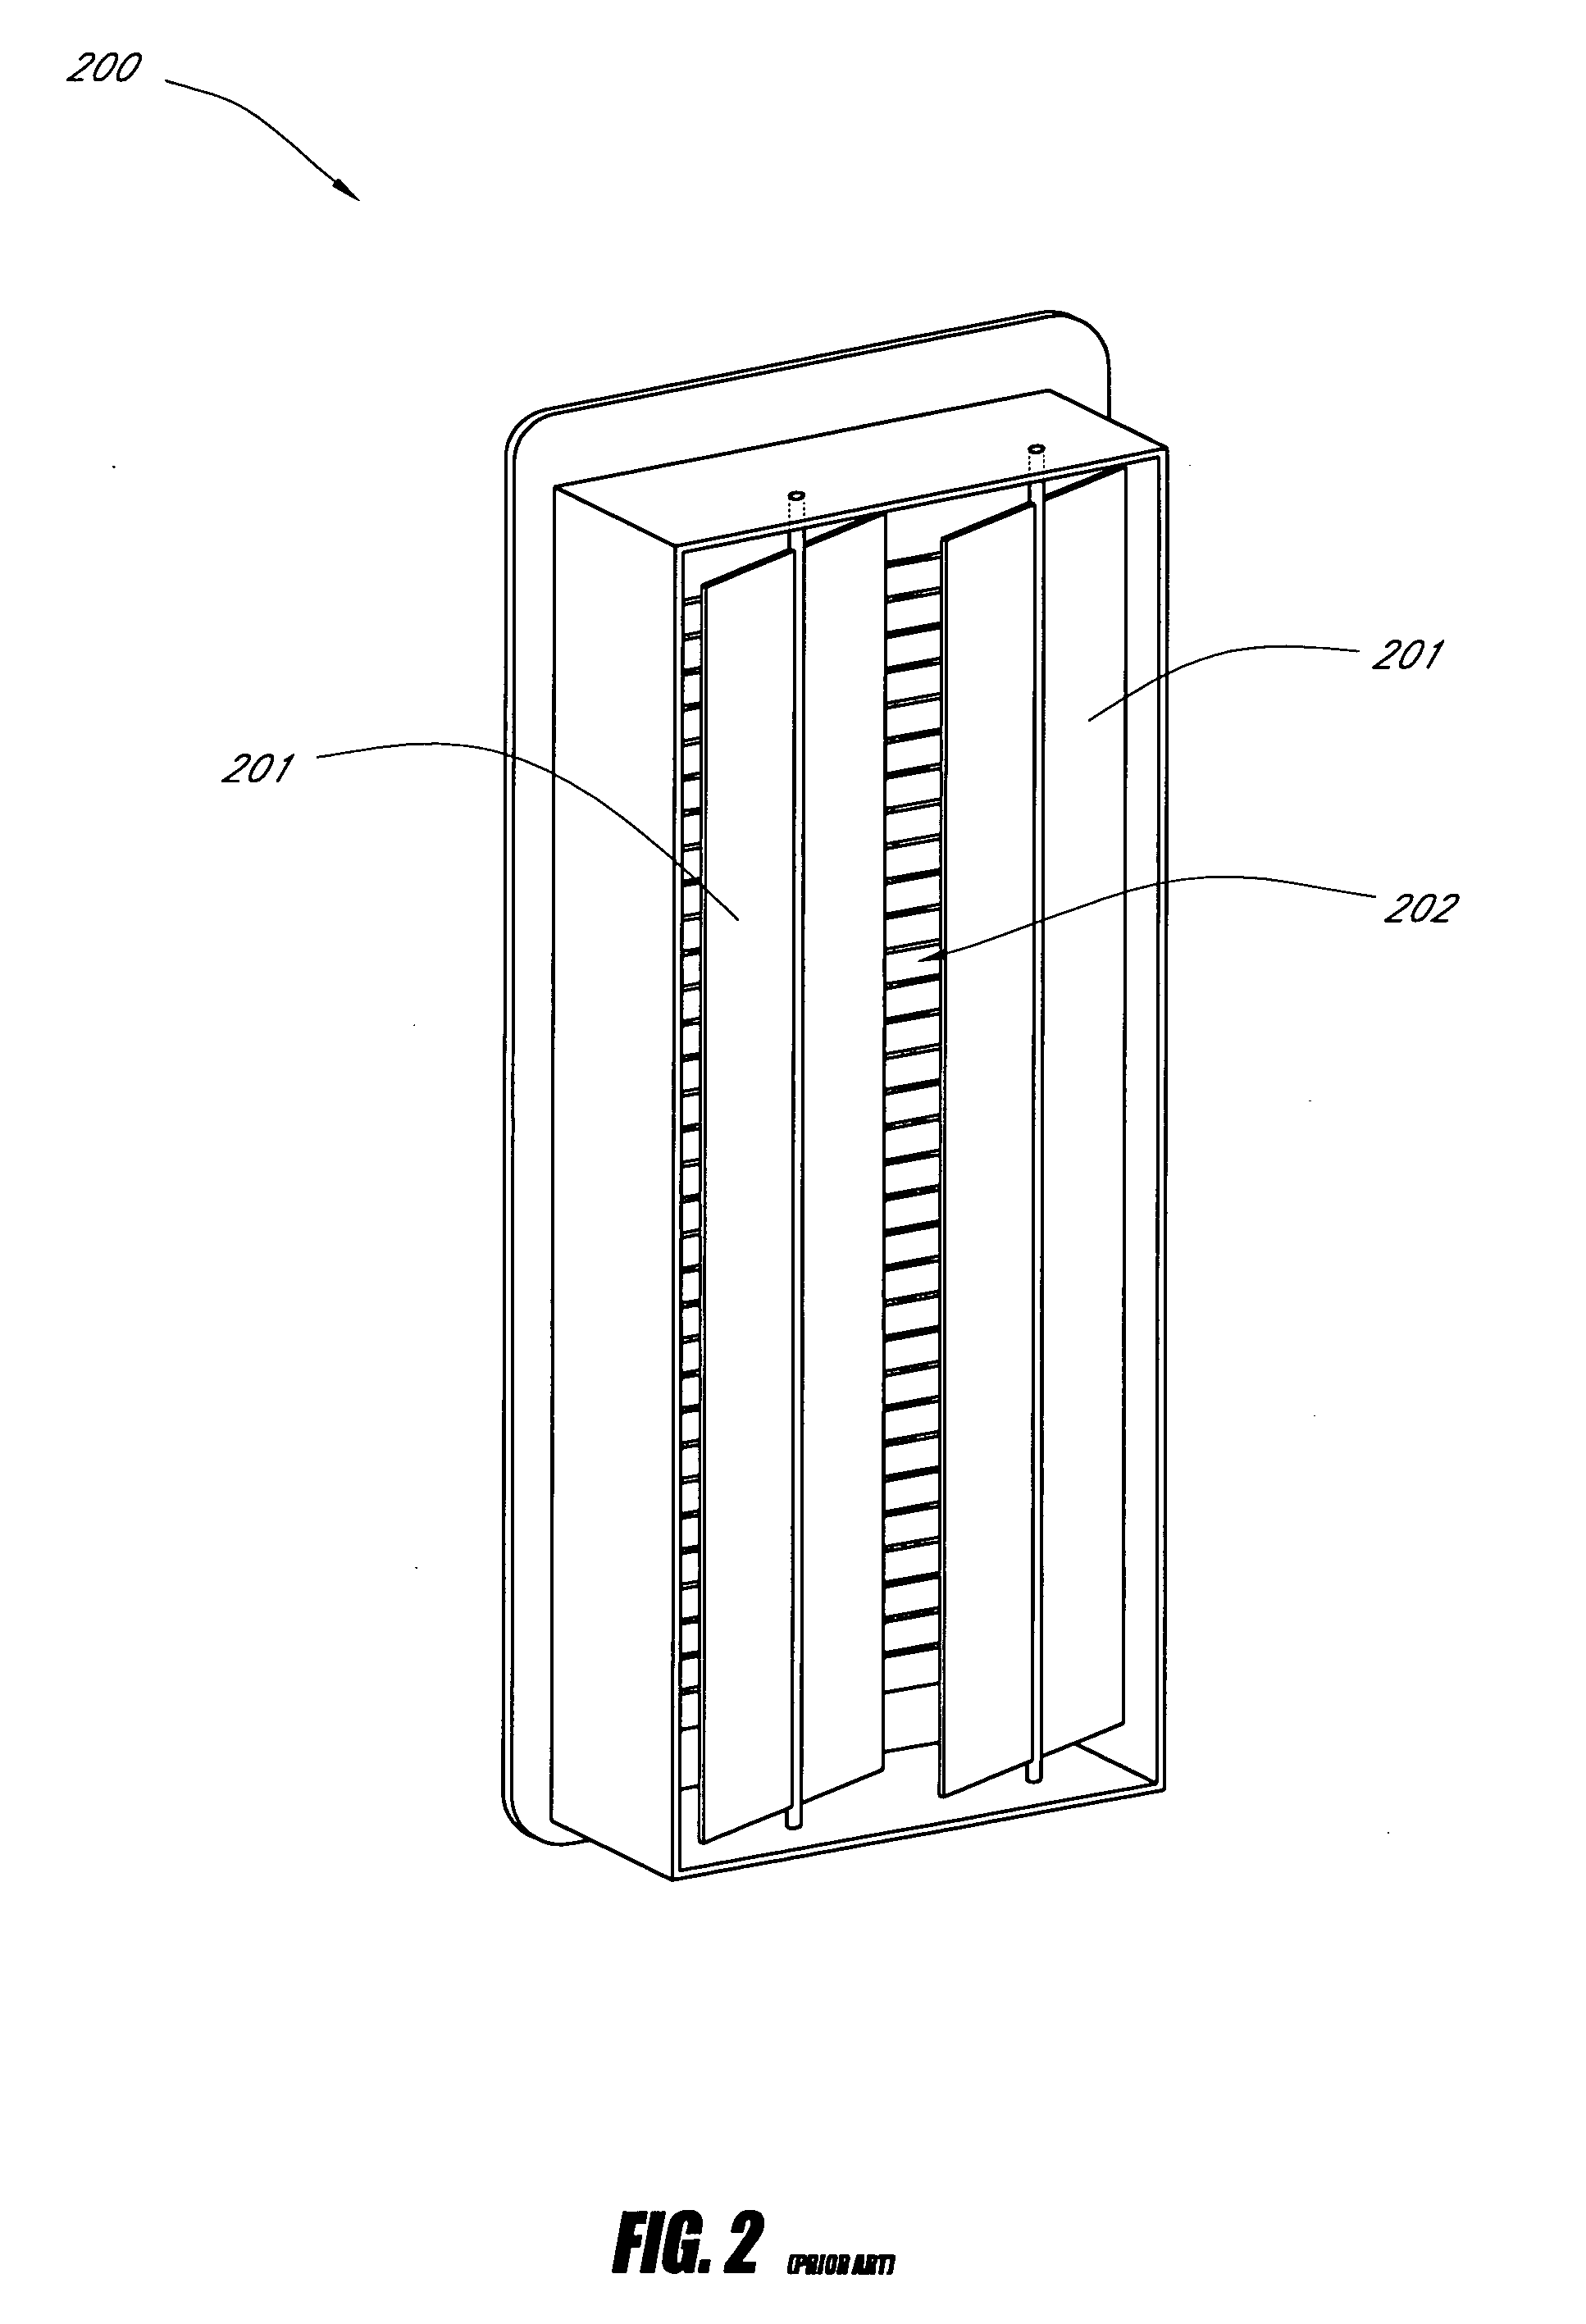 Electronically-controlled register vent for zone heating and cooling